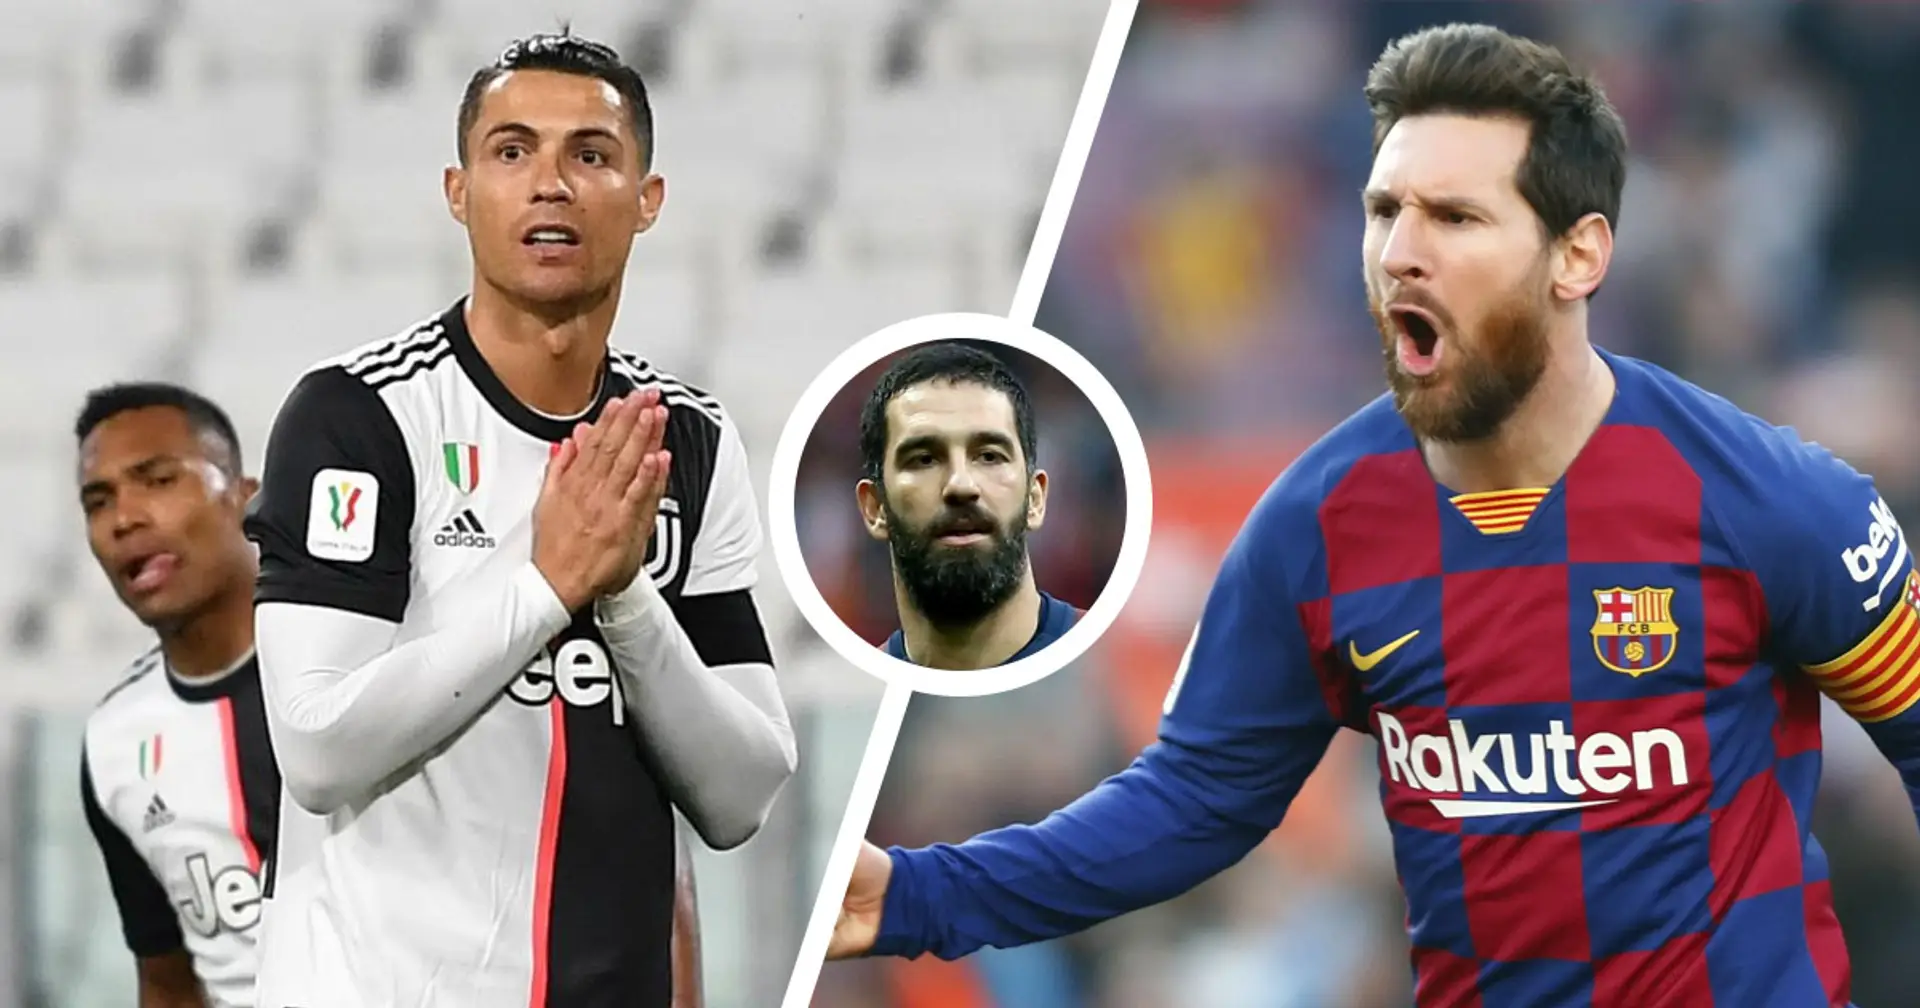 Everybody agrees Messi is better except people who are close to Ronaldo, they answer politically: Arda Turan